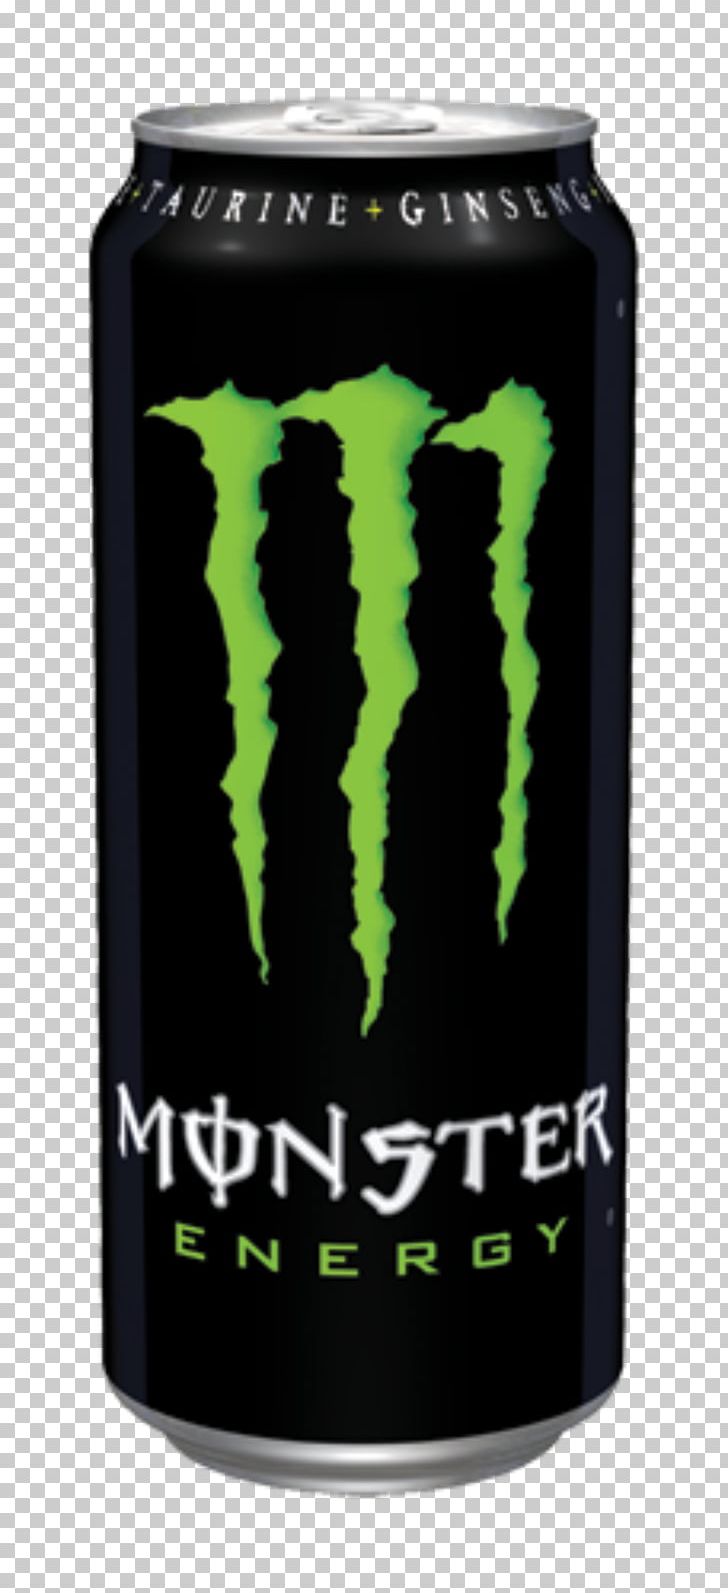 Energy Drink Monster Energy Mercedes AMG Petronas F1 Team Formula 1 PNG, Clipart, Aluminum Can, Caffeine, Cars, Drink, Energy Free PNG Download